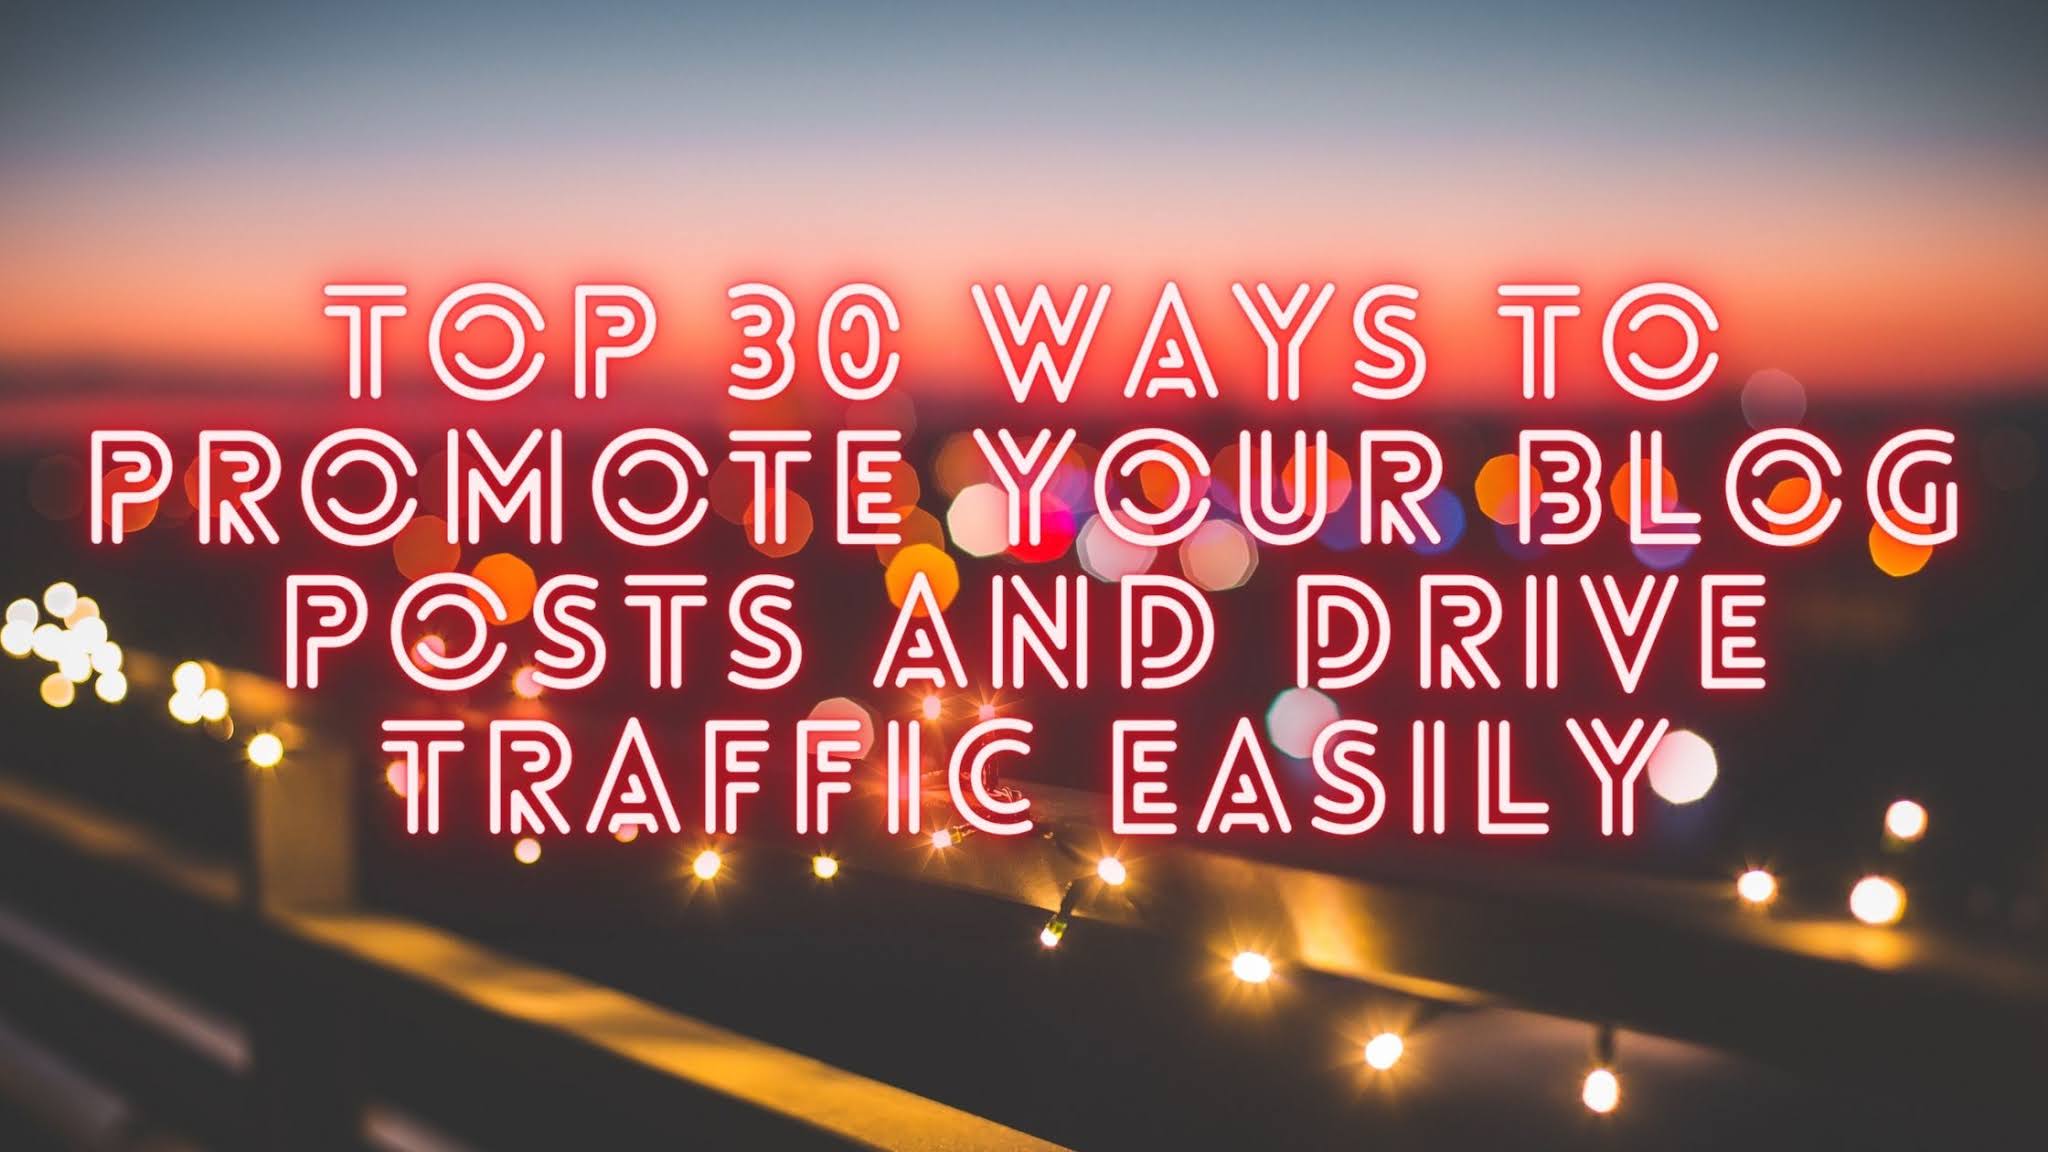 top 30 ways to promote your blog posts and drive traffic easily